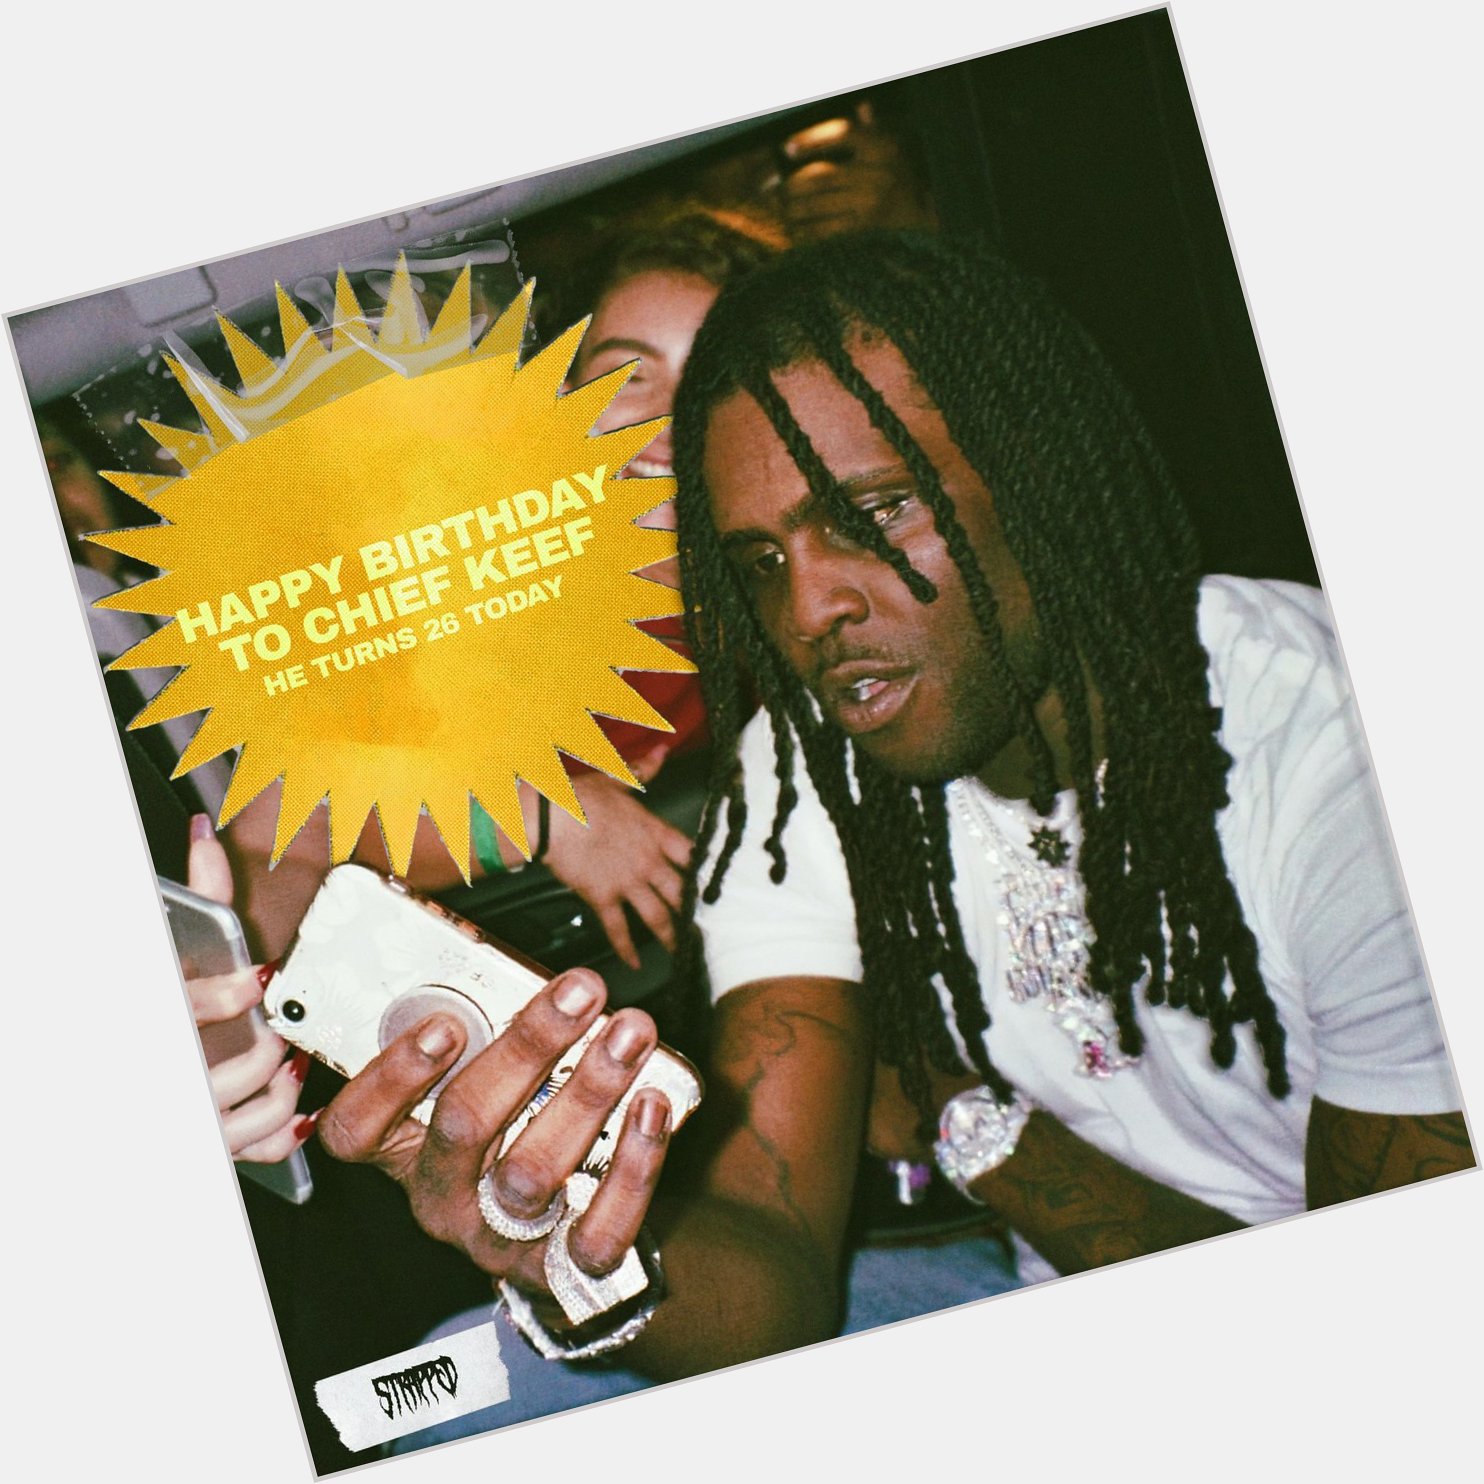 Happy birthday to Chief Keef, he turns 26 today  What s your favorite song by him? 